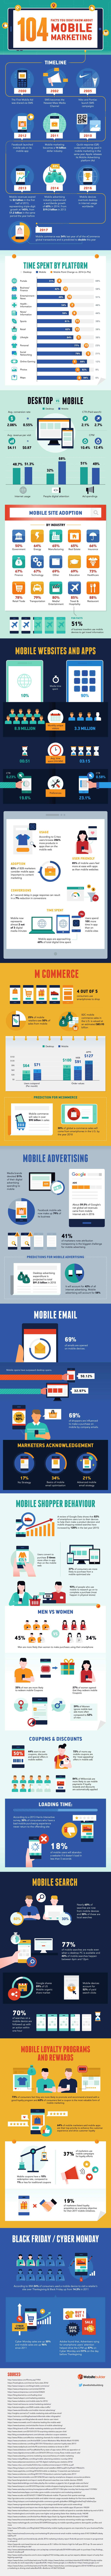 104-mobile-marketing-facts